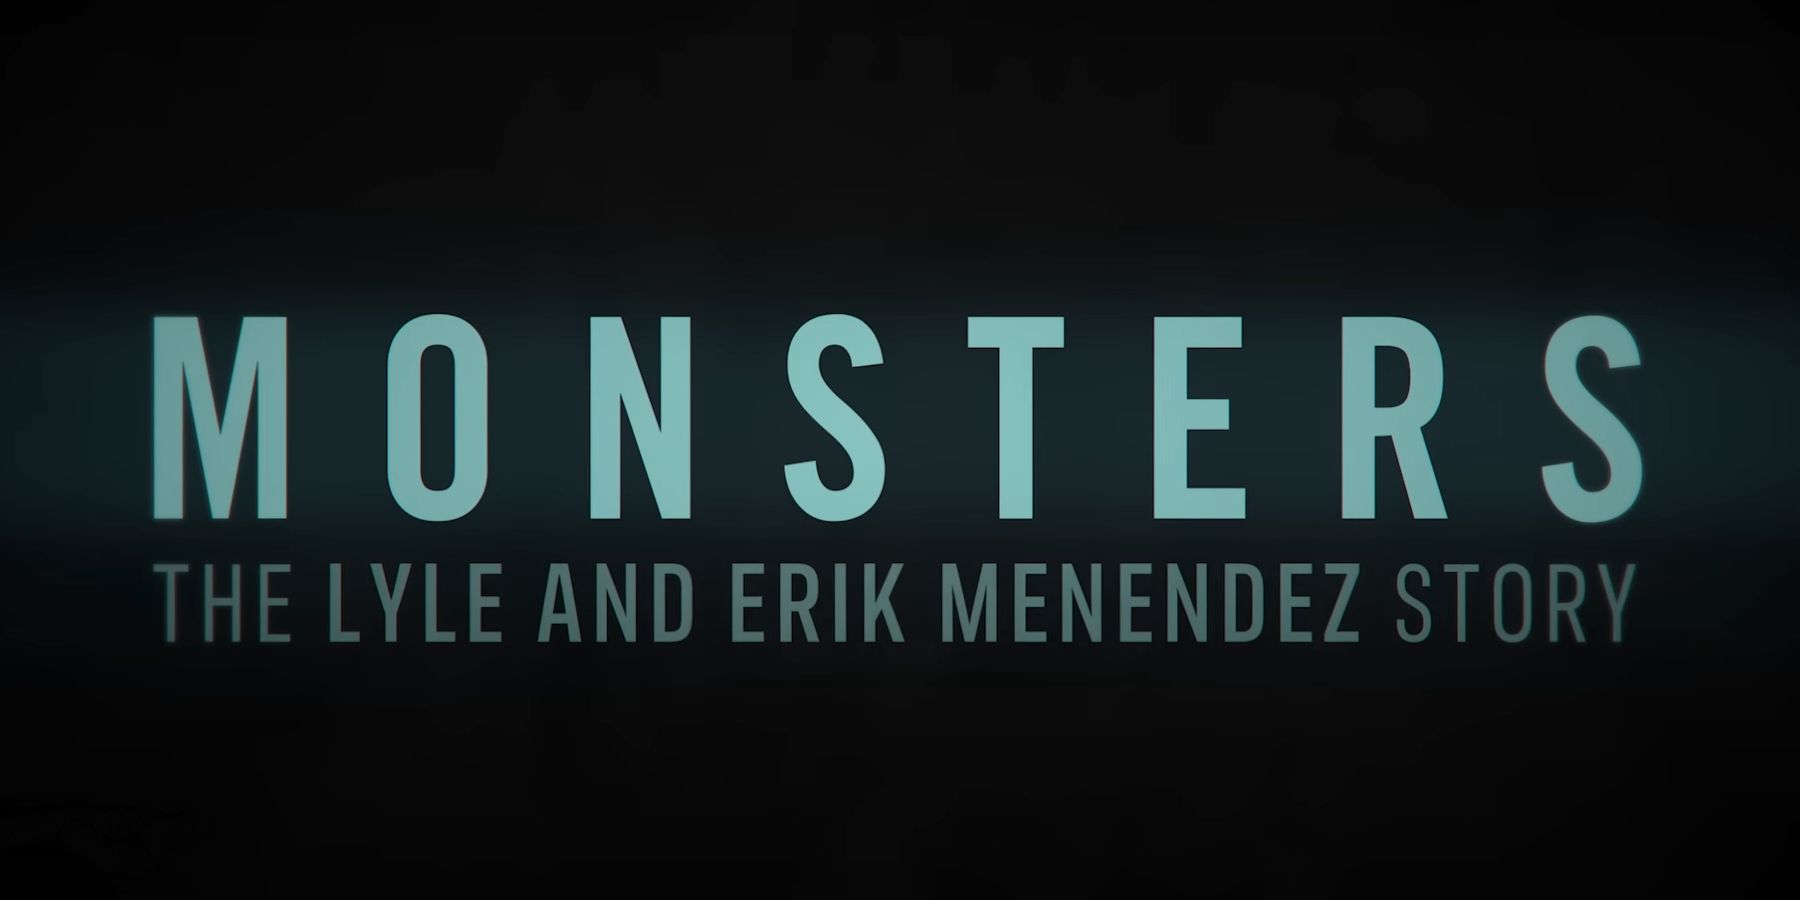 the logo for netflix's upcoming monsters: the lyle and erik menendez story